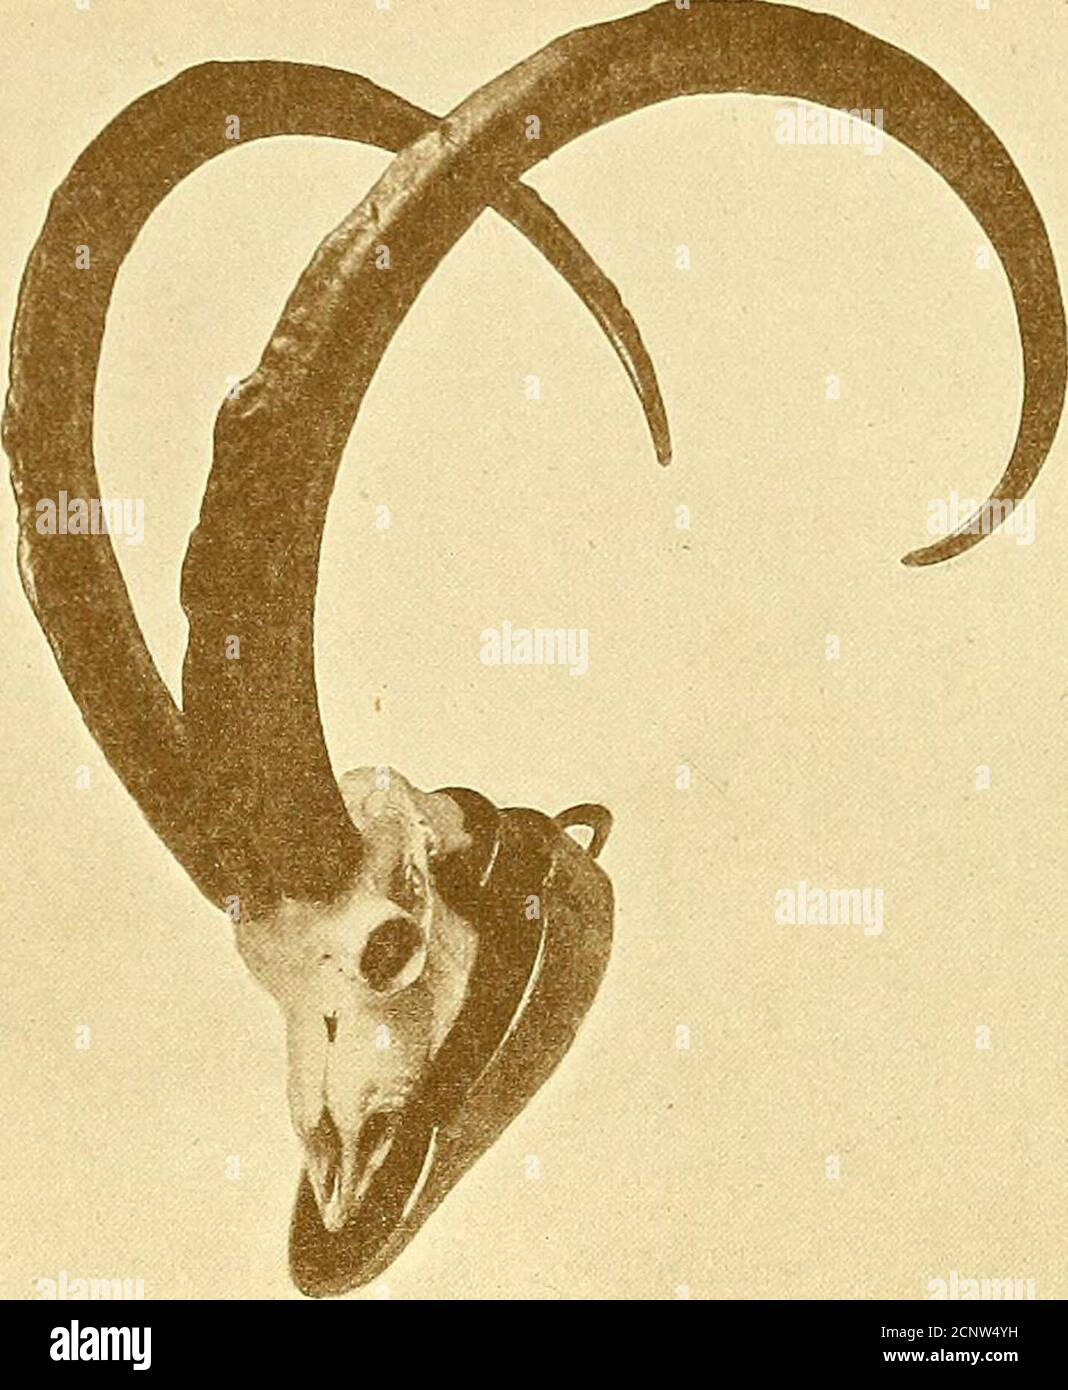 . Records of big game with their distribution, characteristics, dimensions, weights, and horn & tusk measurements . /♦r Skull and Horns of Arabian Ibex. Shot by Major W. Merewether. ,5. and C—-S. ARABIAN and SINAITIC RACES (C. nubiana mengesi and sinaitica). Lengthon frontcurve. Circum-ference. Tip toTip. Locality. Owner. 50 9 Southern Arabia Capt. J. T. Brinkley. 42 7i Arabia East India Club. 414 8 l6b Do. Sir Edmund G. Loder, Bart 39i 8| 19I South-East Arabia Hon. Walter Rothschild. 3§i 7h 12 Sinai R. Hayne. 37f 7 i3i Do. Capt. C. P. Hey wood. 374 6i 12 Do. P. Swan. 36| 74 9i Do. W. H. Totti Stock Photo